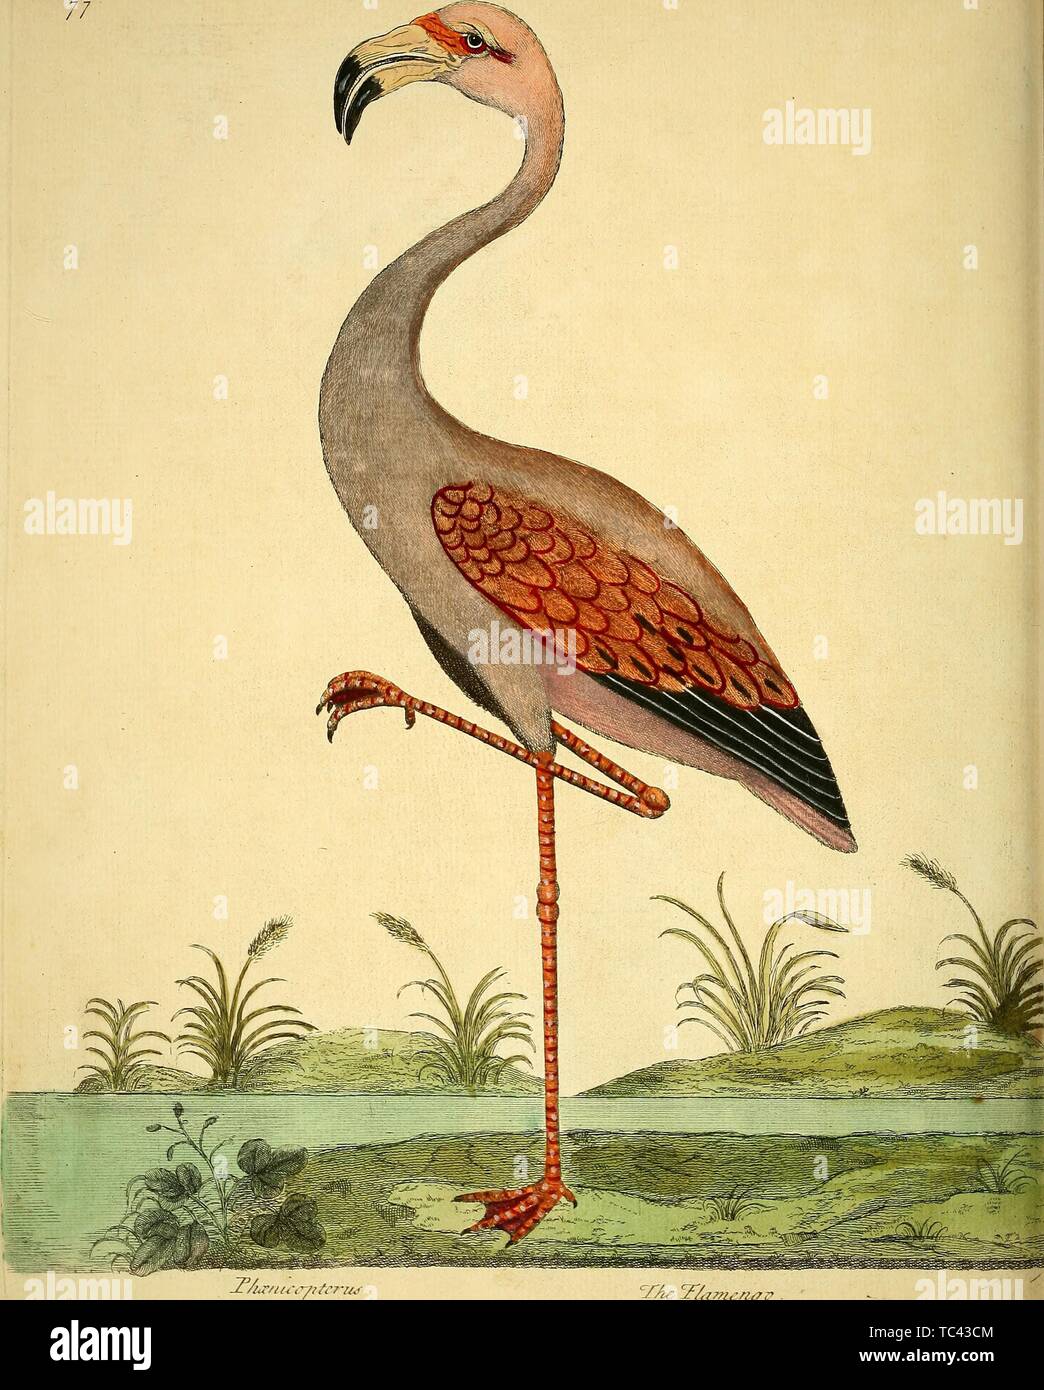 Engraving of the Flamingo (Phoenicopterus), from the book 'A natural history of birds' by Eleazar Albin, William Derham, Jonathan Dwight, and Marcia Brady, 1731. Courtesy Internet Archive. () Stock Photo